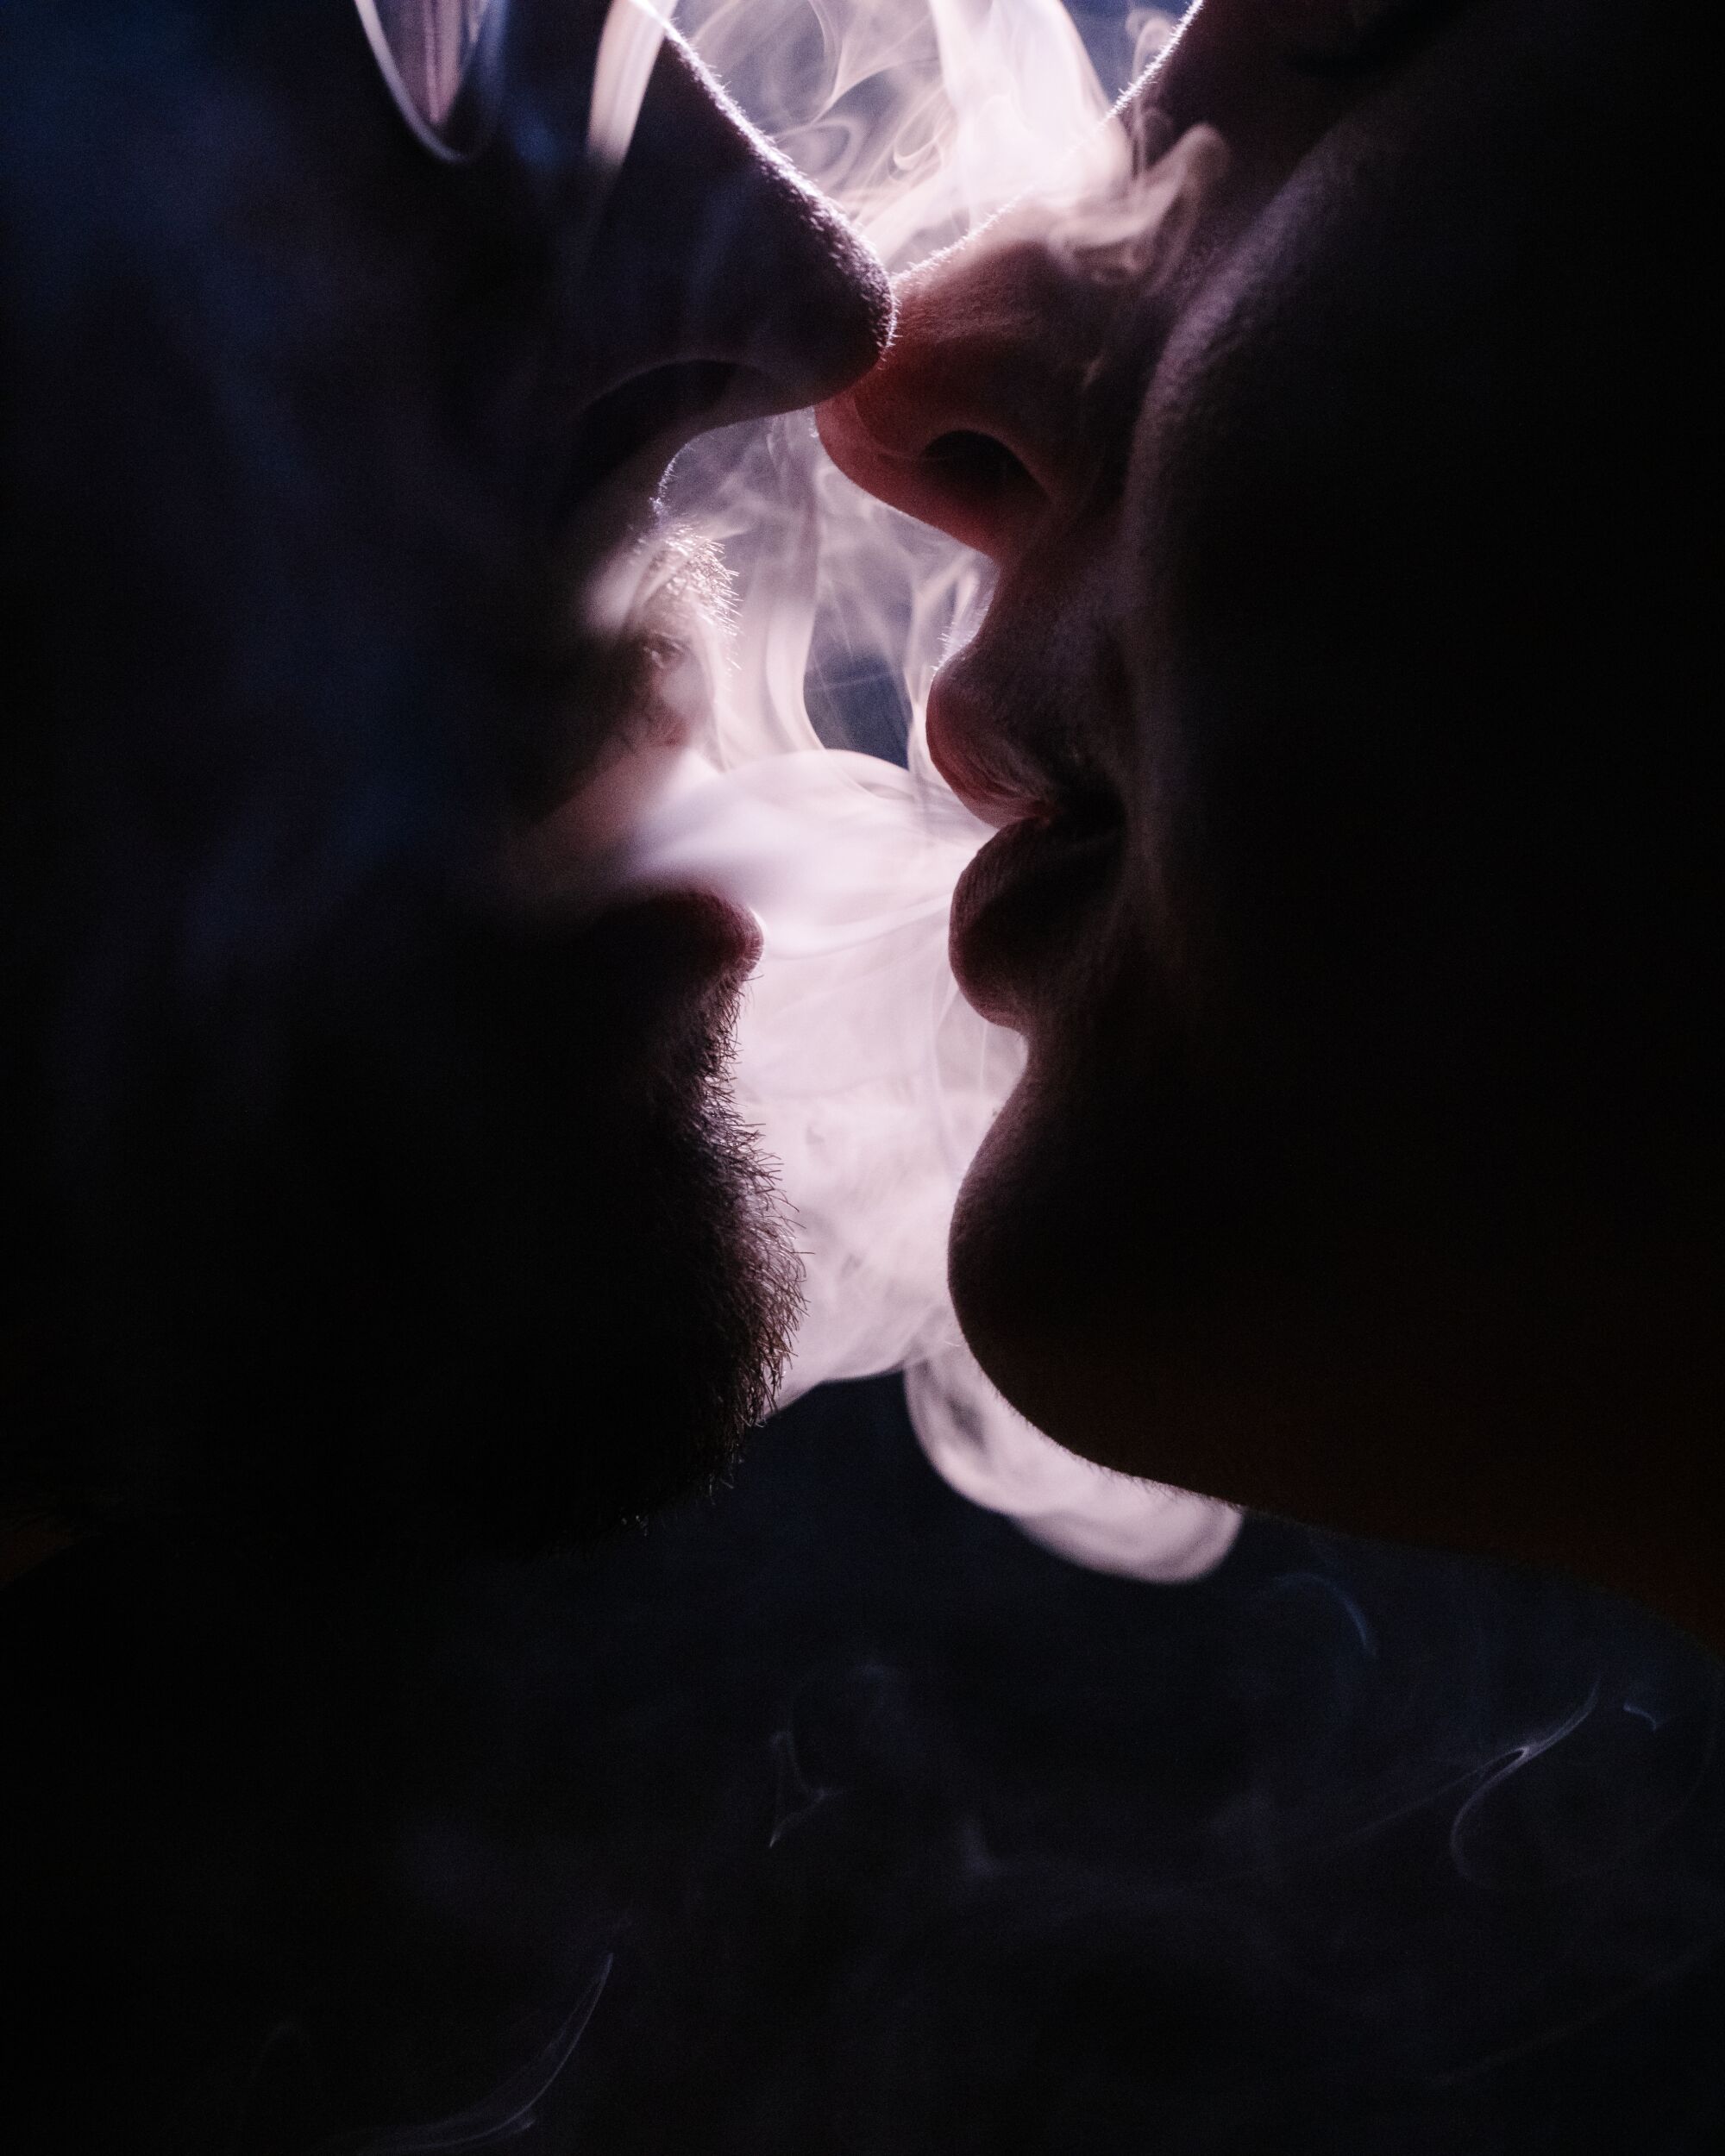 Two people smoke weed as they are about to kiss.